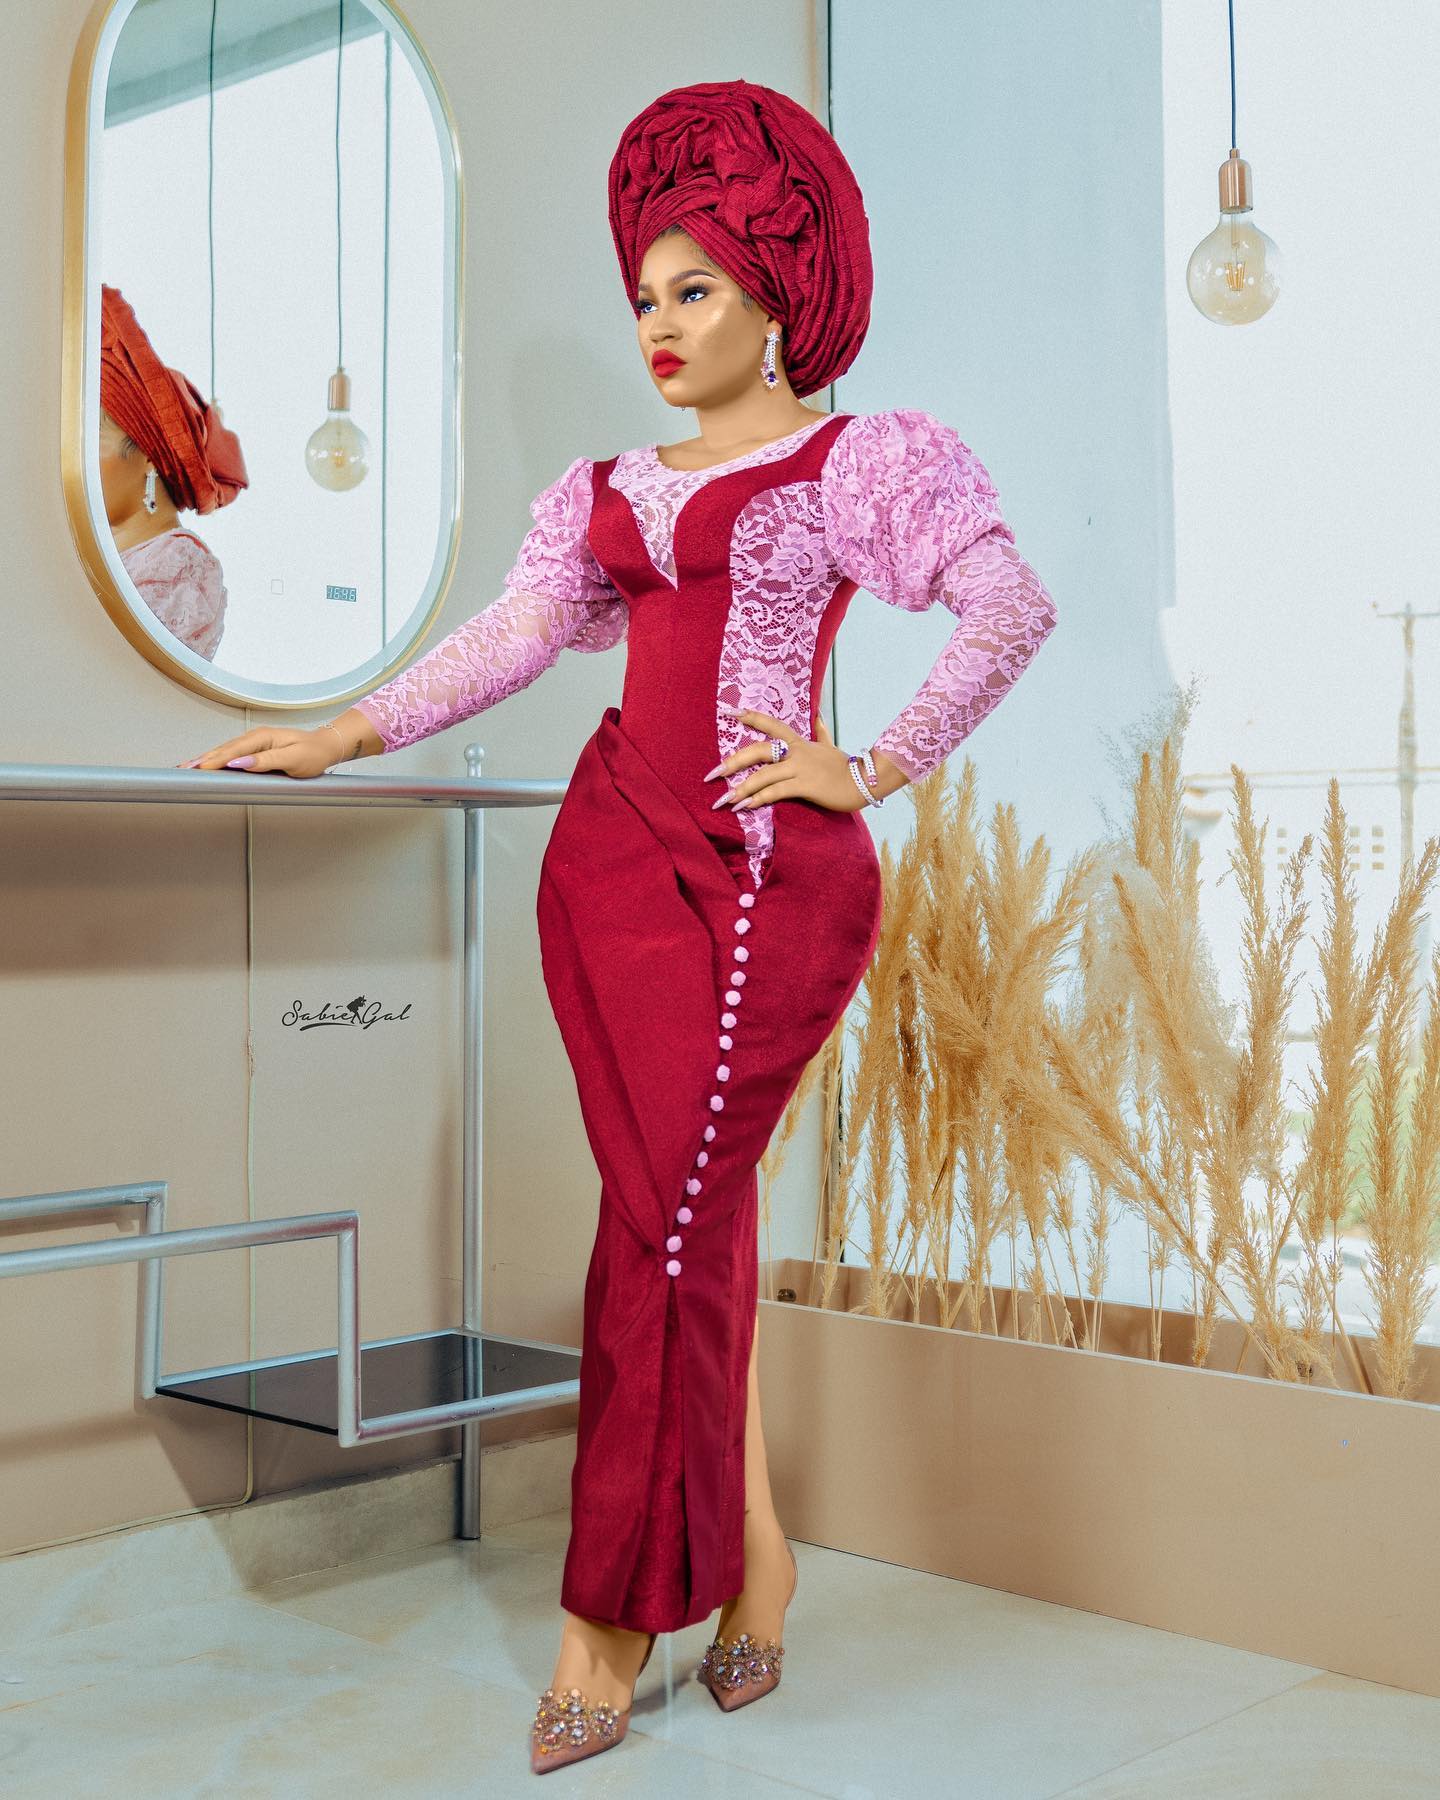 Adeola Adeyemi- Stunning And In-Trend Owambe Style